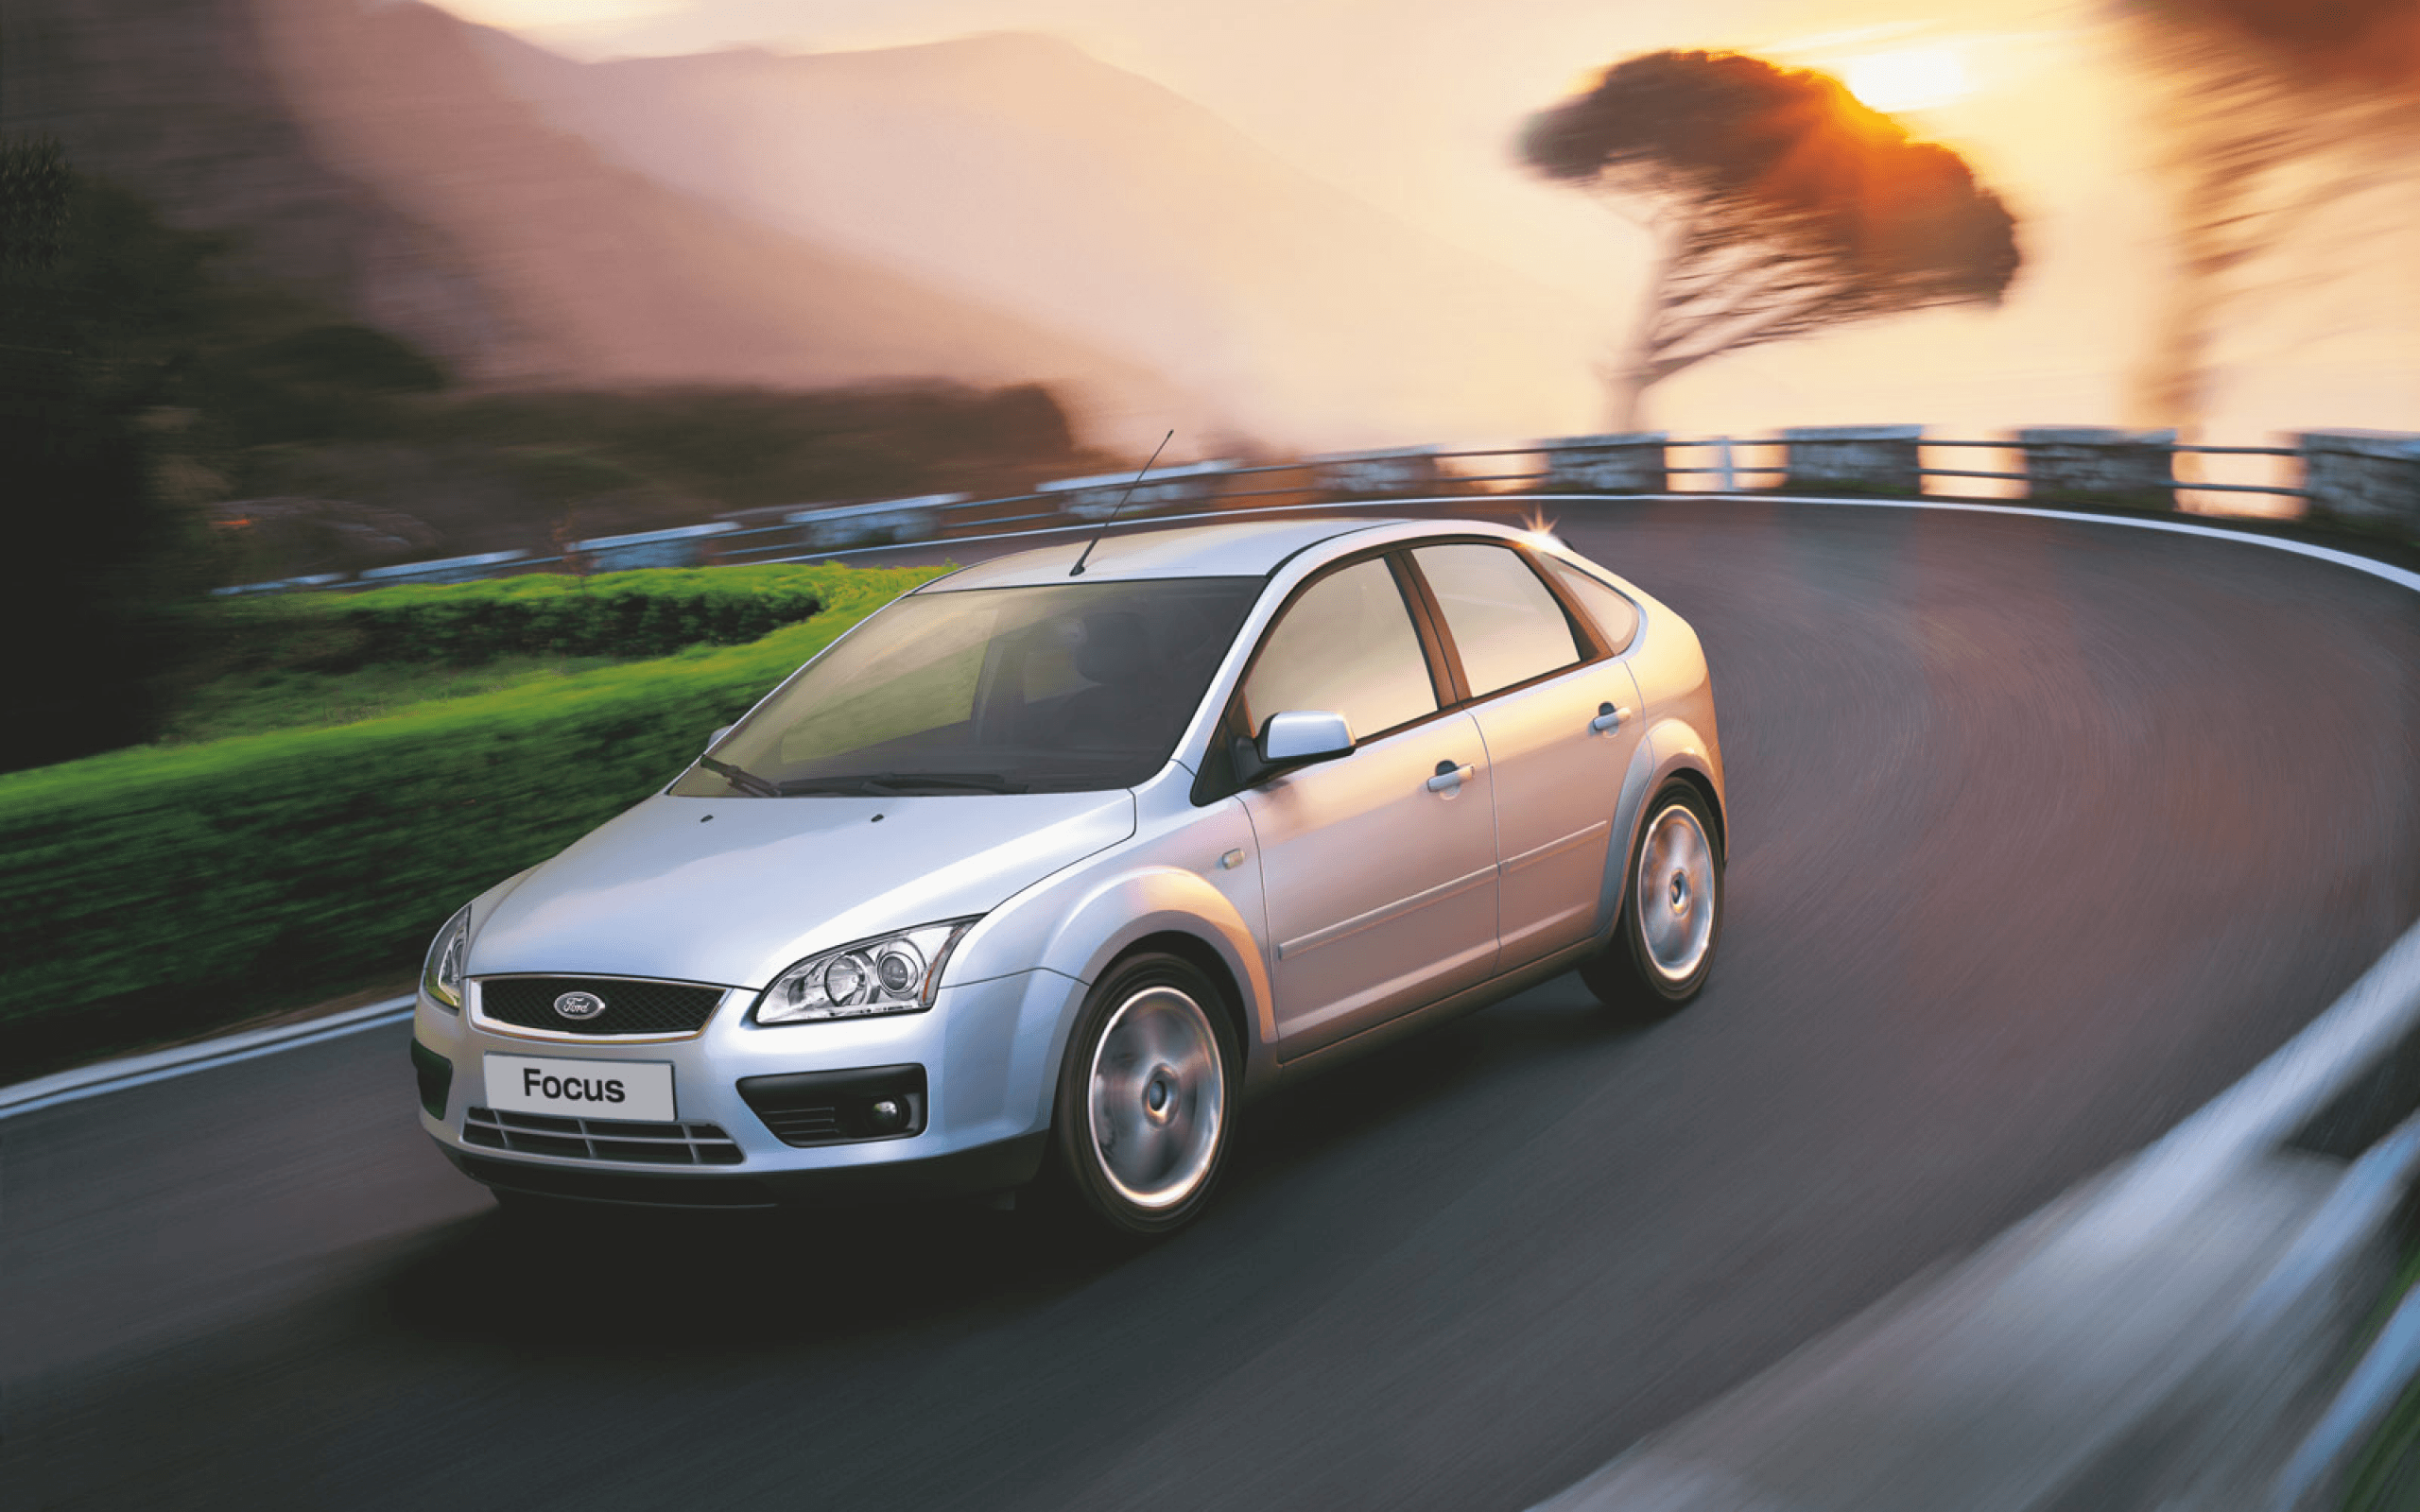 Машина форд фокус хэтчбек. Ford Focus 2. Форд фокус 2 хэтчбек. Ford Focus 5. Ford Focus II 2004-2011.